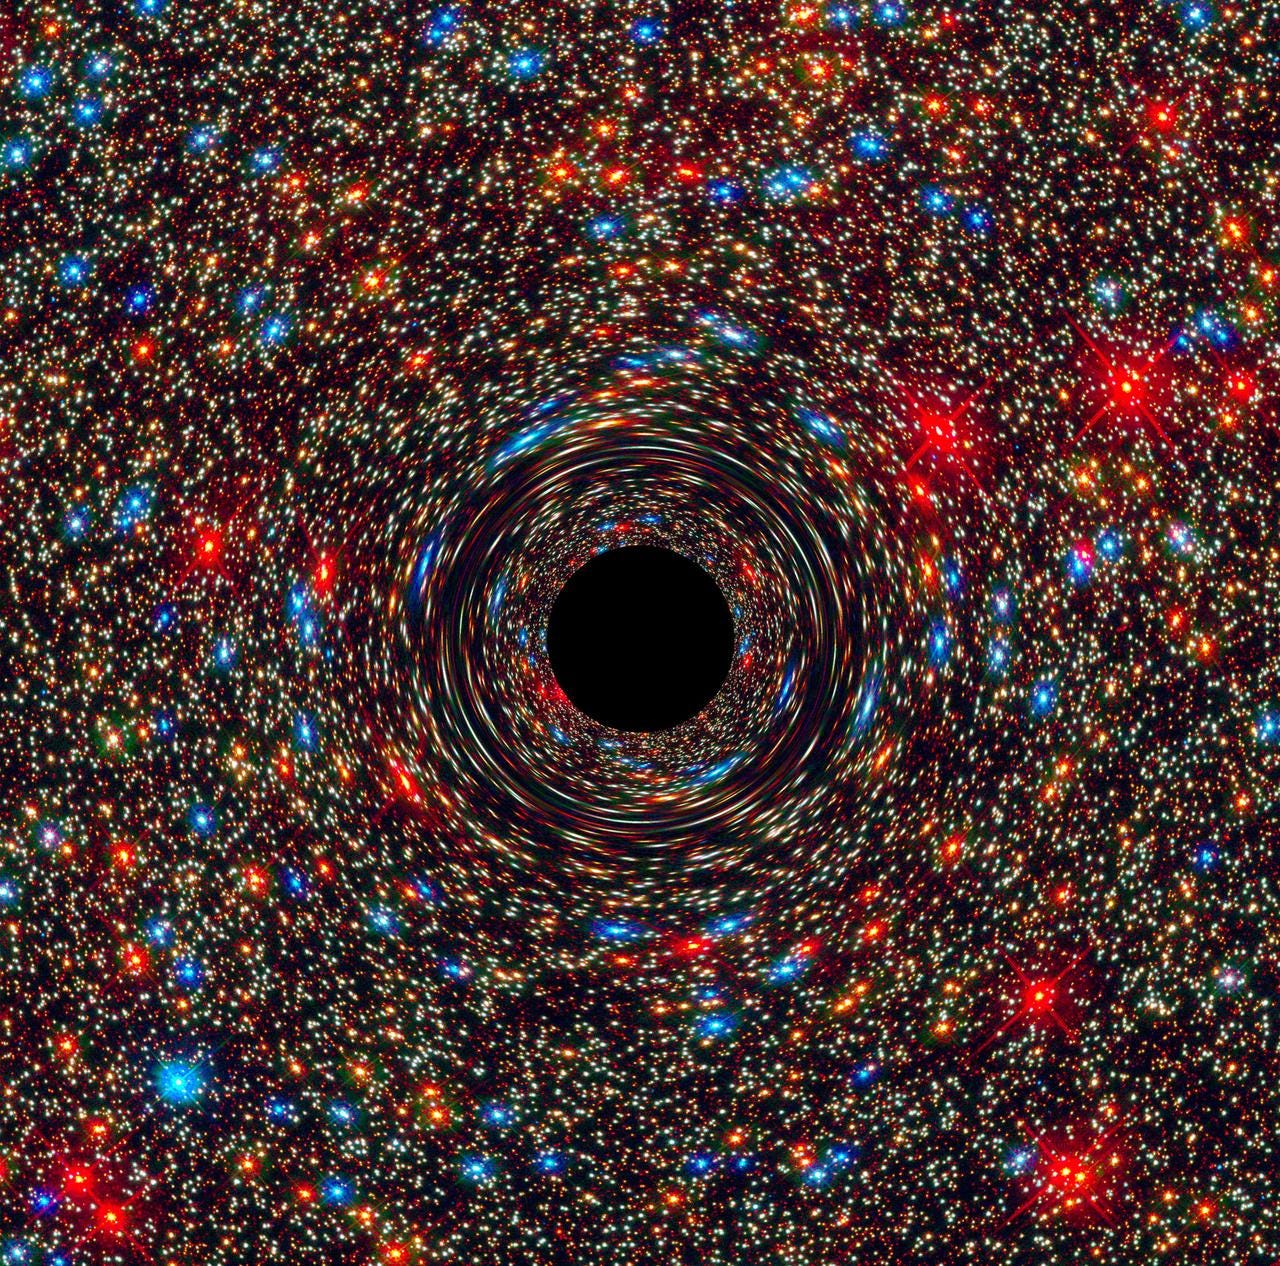 This computer-simulated image shows a supermassive black hole at the core of a galaxy. The black region in the center represents the black hole’s event horizon, where no light can escape the massive object’s gravitational grip. The black hole’s powerful gravity distorts space around it like a funhouse mirror. Light from background stars is stretched and smeared as the stars skim by the black hole.

Credits: NASA, ESA, and D. Coe, J. Anderson, and R. van der Marel (STScI)

More info: Astronomers have uncovered a near-record breaking supermassive black hole, weighing 17 billion suns, in an unlikely place: in the center of a galaxy in a sparsely populated area of the universe. The observations, made by NASA’s Hubble Space Telescope and the Gemini Telescope in Hawaii, may indicate that these monster objects may be more common than once thought.

Until now, the biggest supermassive black holes – those roughly 10 billion times the mass of our sun – have been found at the cores of very large galaxies in regions of the universe packed with other large galaxies. In fact, the current record holder tips the scale at 21 billion suns and resides in the crowded Coma galaxy cluster that consists of over 1,000 galaxies.